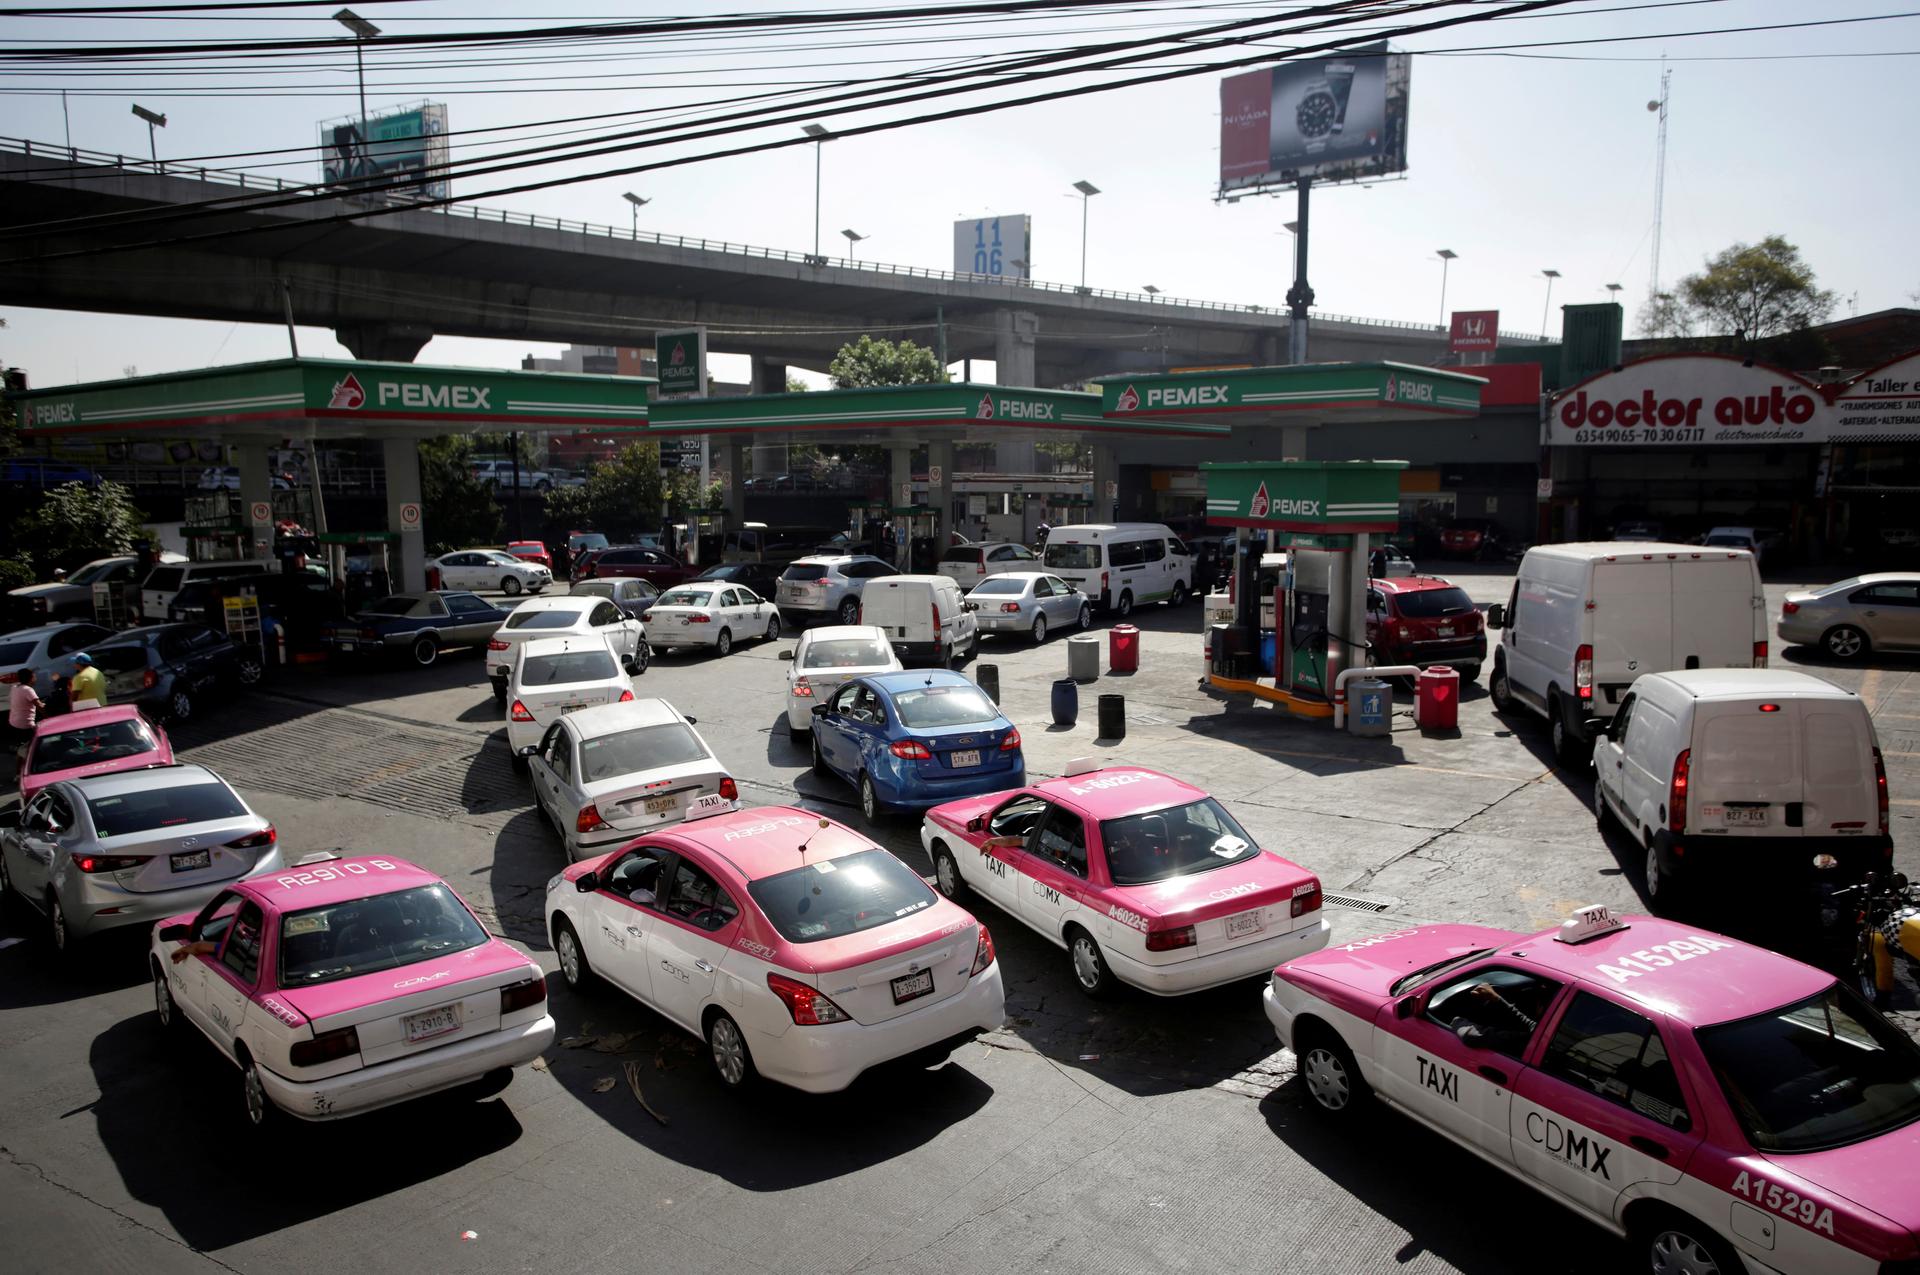 dozens and dozens of taxis line up around a fuel station